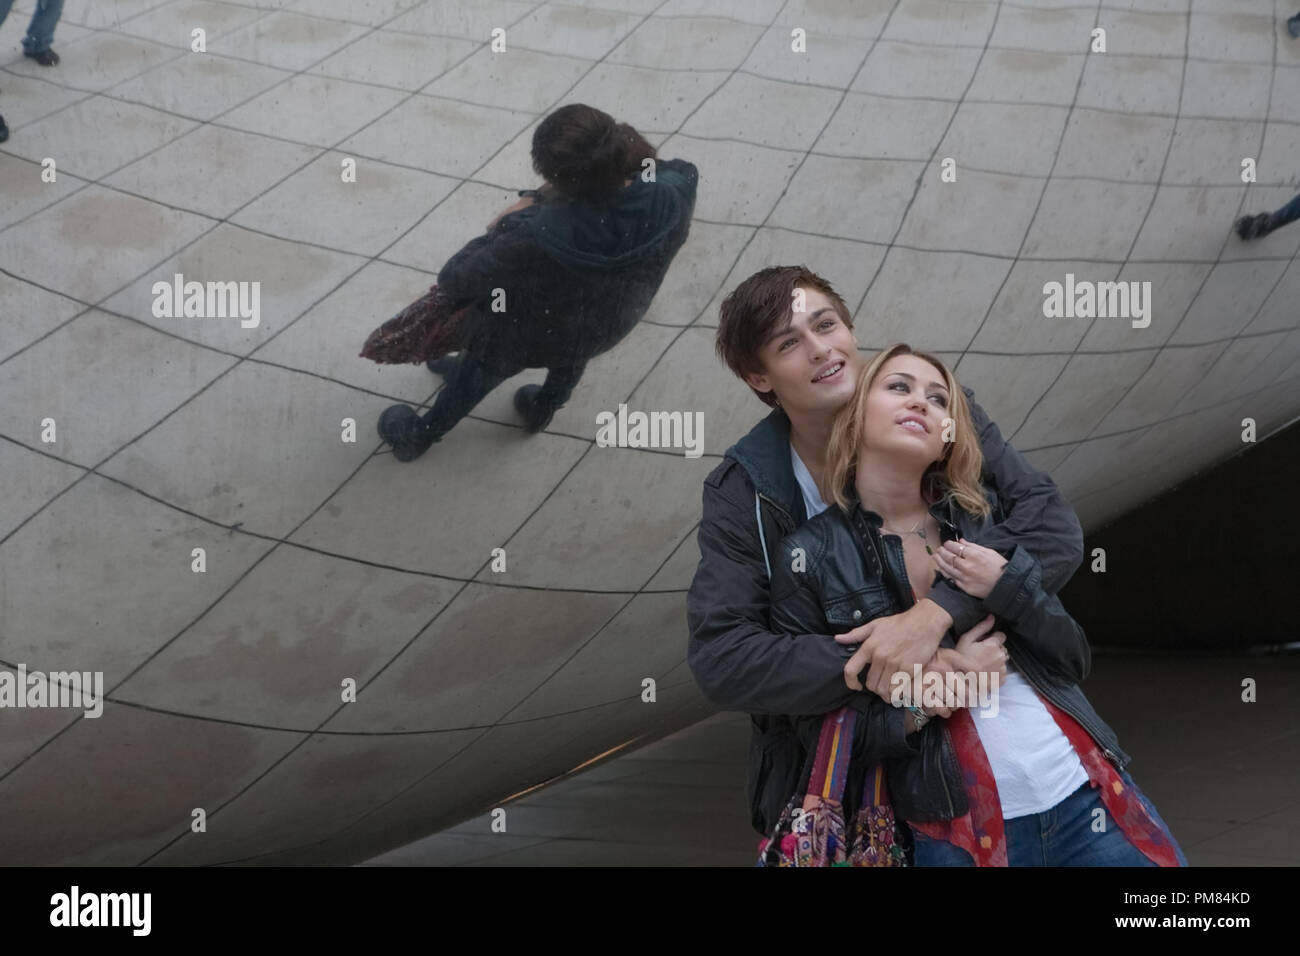 Kyle (Douglas Booth) and Lola (Miley Cyrus) star in LOL. Photo: Peter Sorel Stock Photo